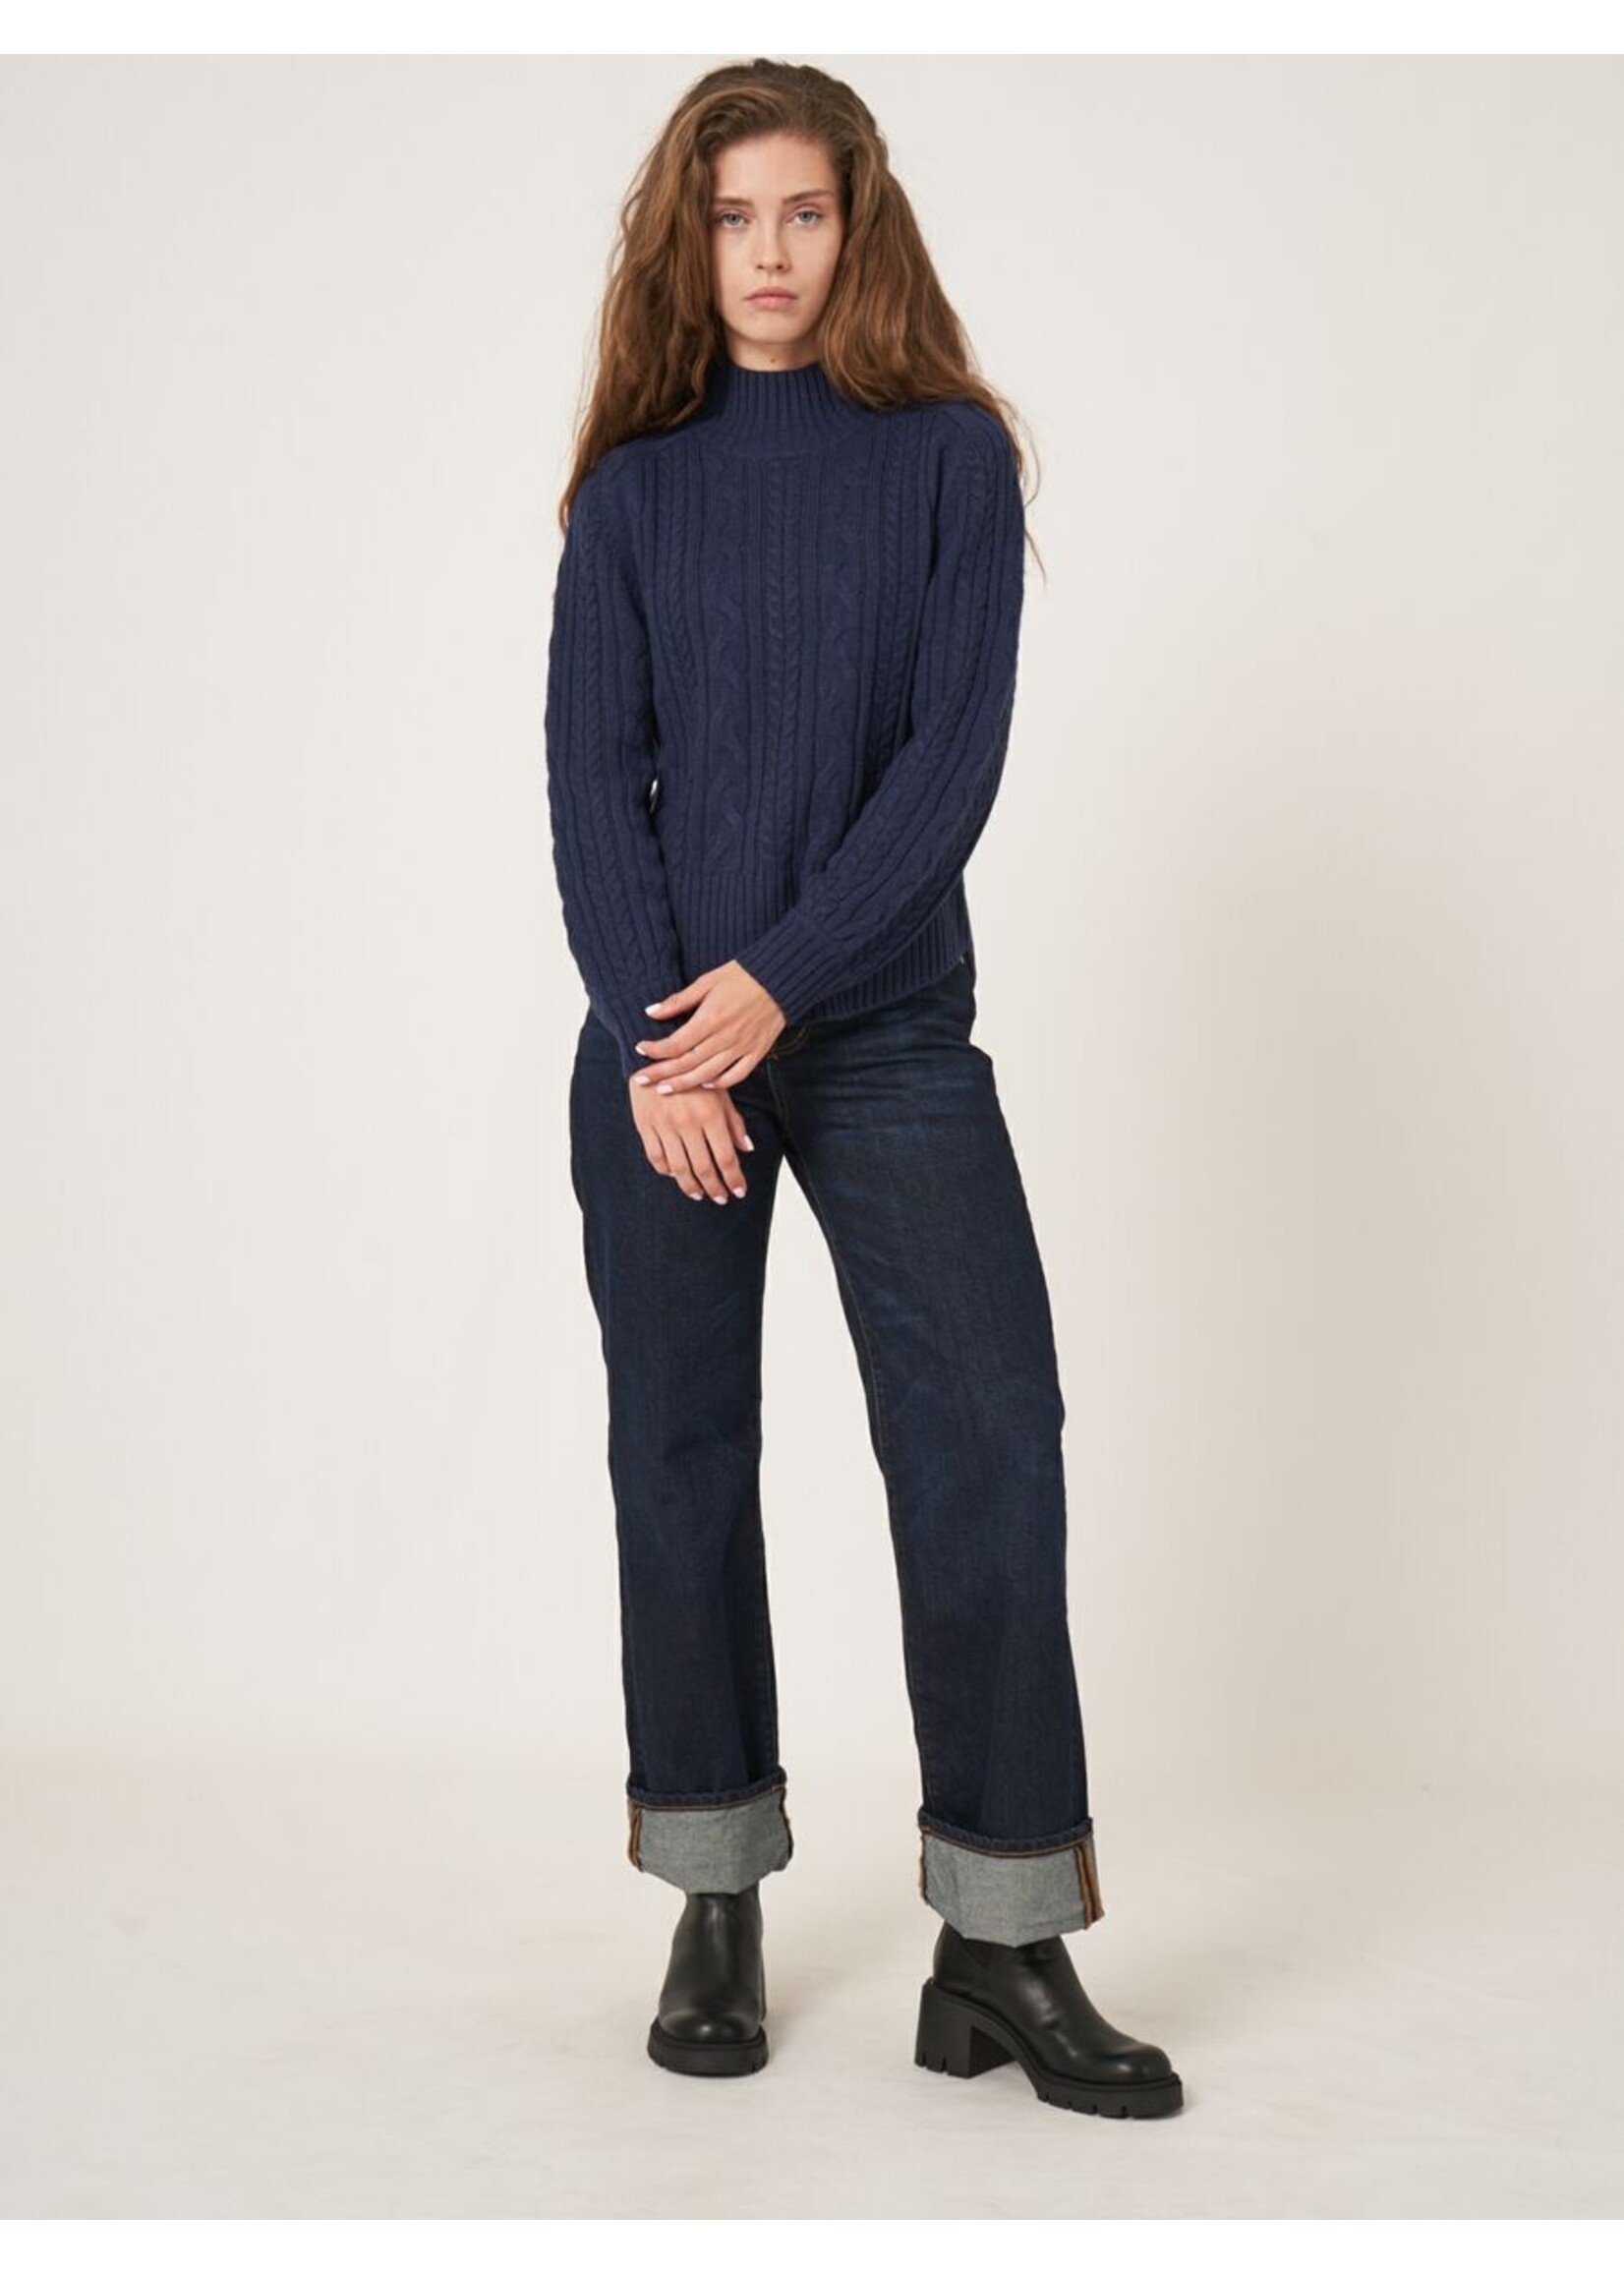 Repeat Repeat - Wool knitted pullover